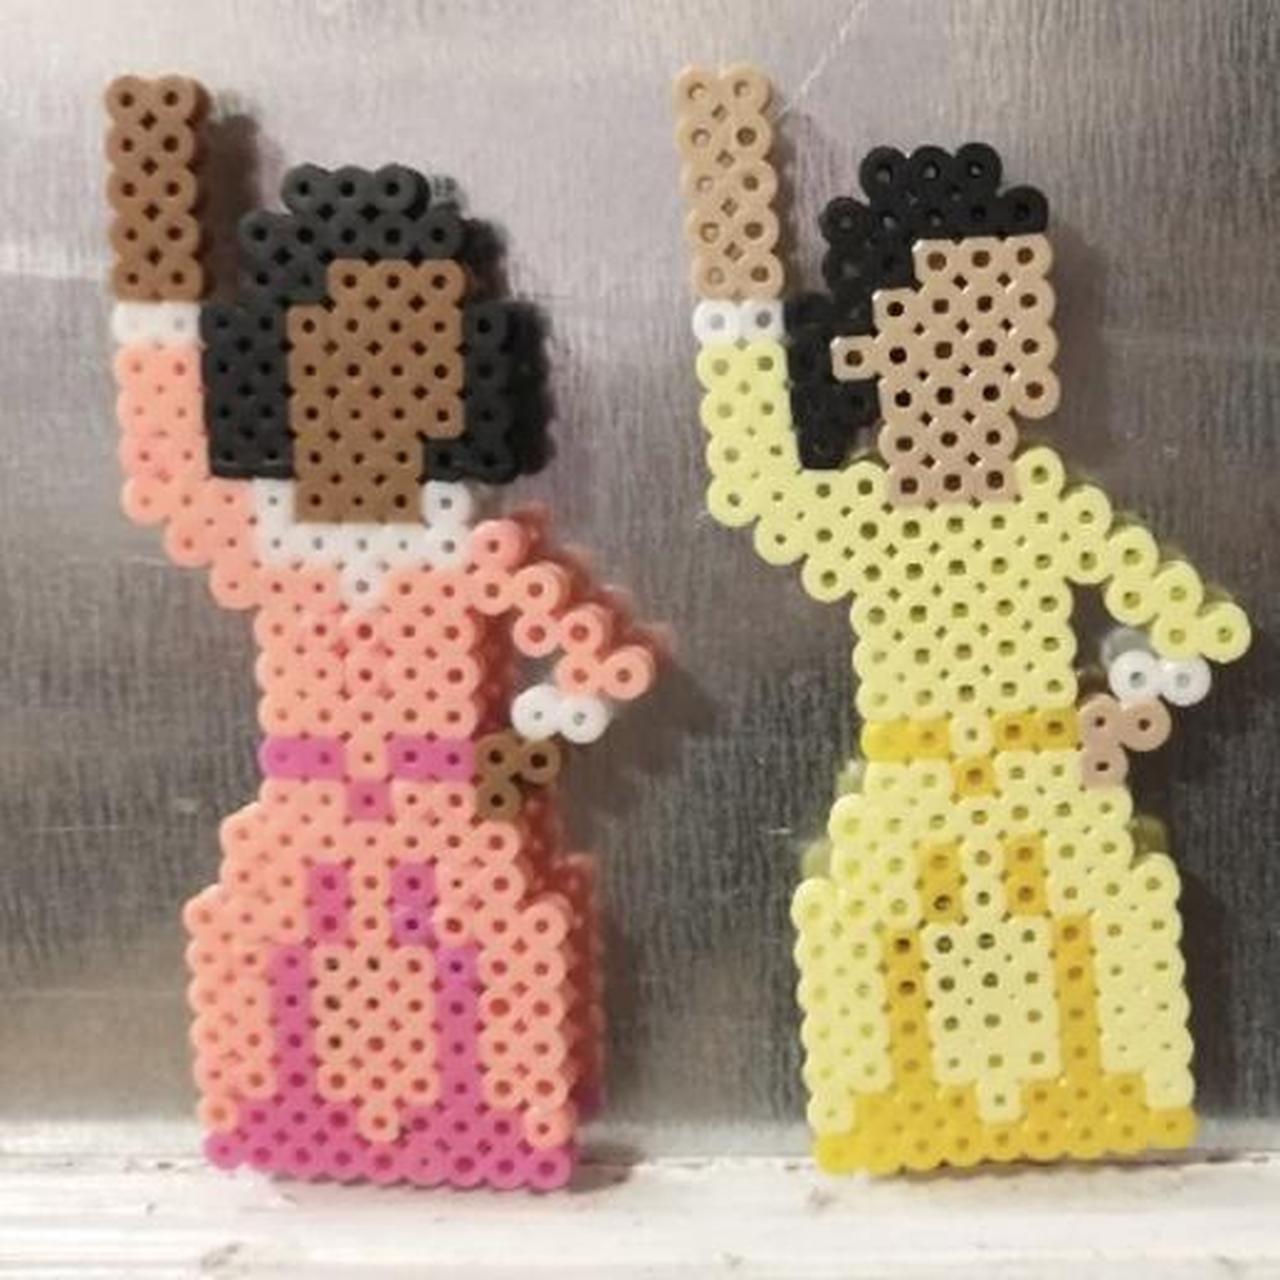 Product Image 2 - perler hamilton schuyler sisters magnets

this